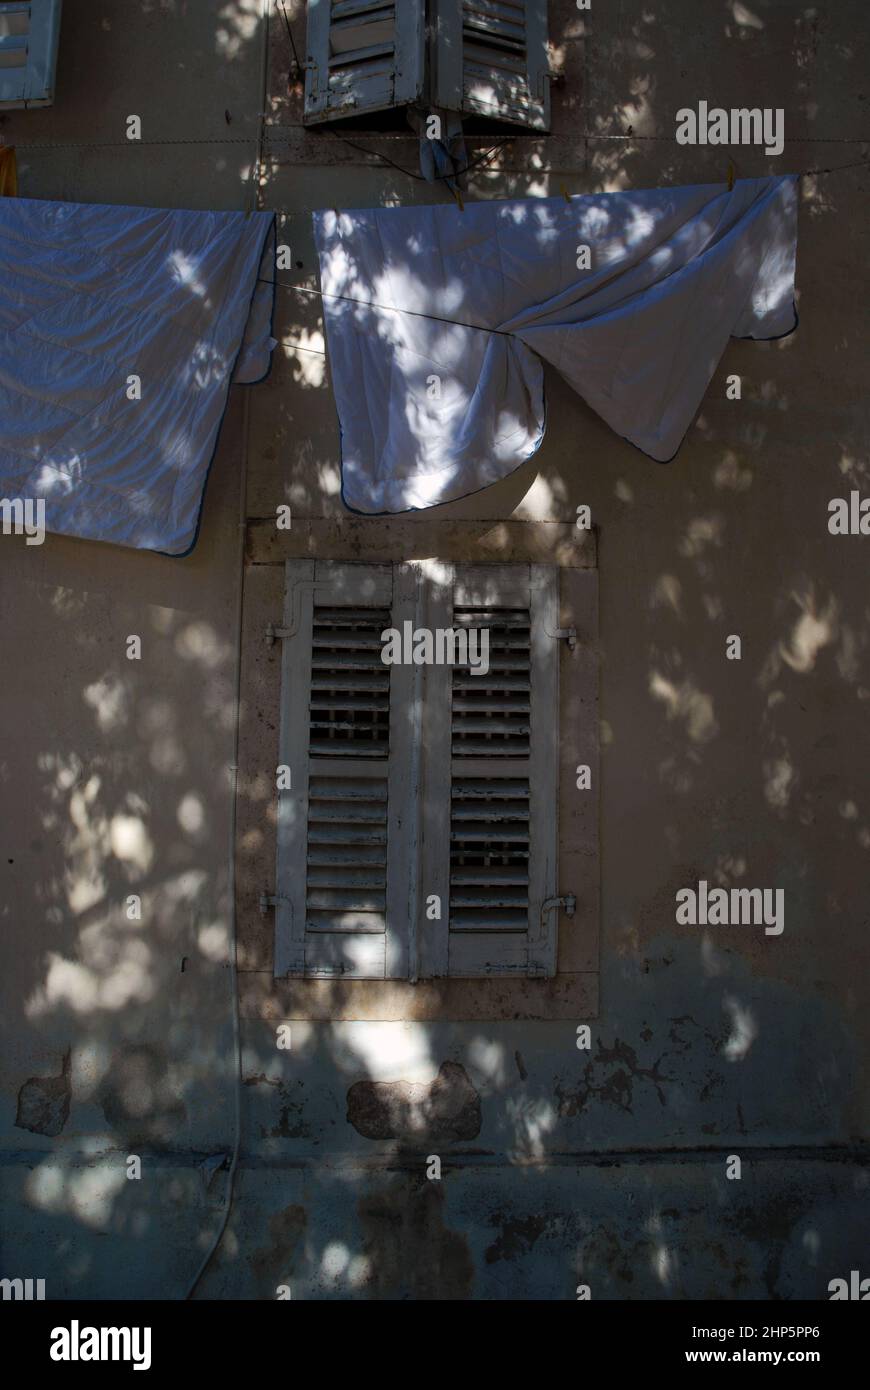 Sheets hanging on washing line from a window, Perast, Montenegro. Stock Photo